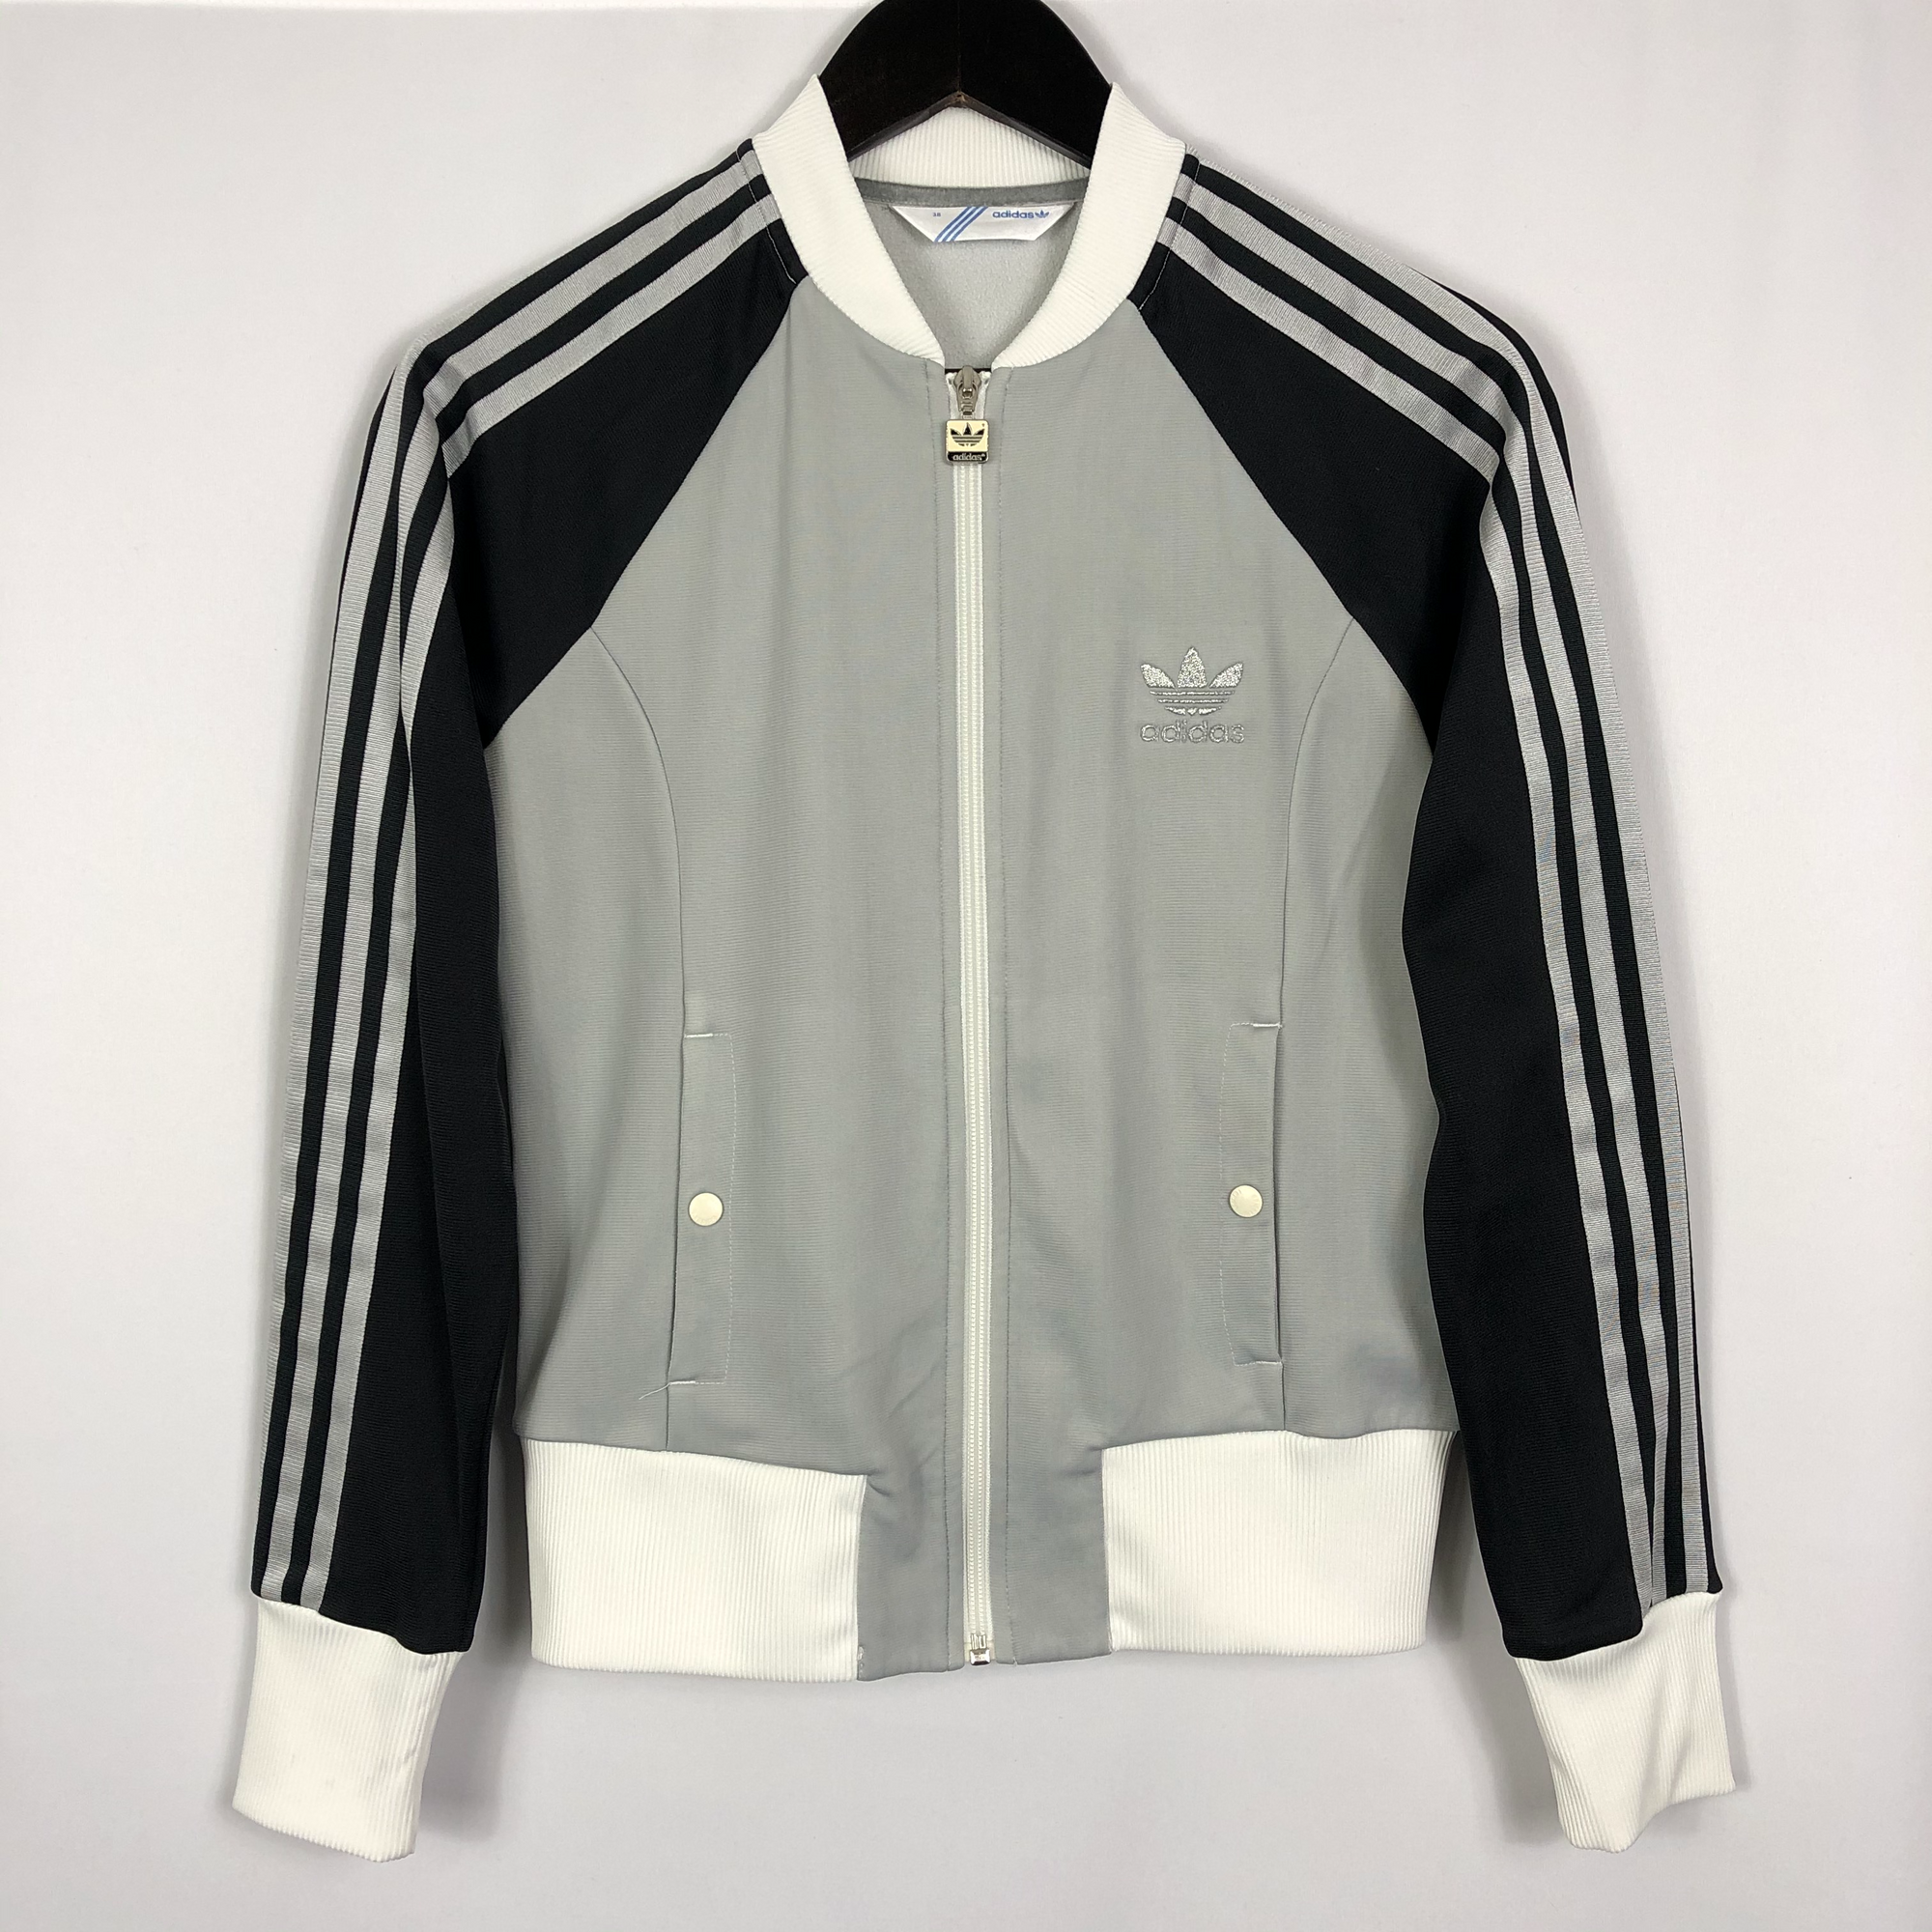 Vintage Adidas Track Jacket in Silver - Women's Small